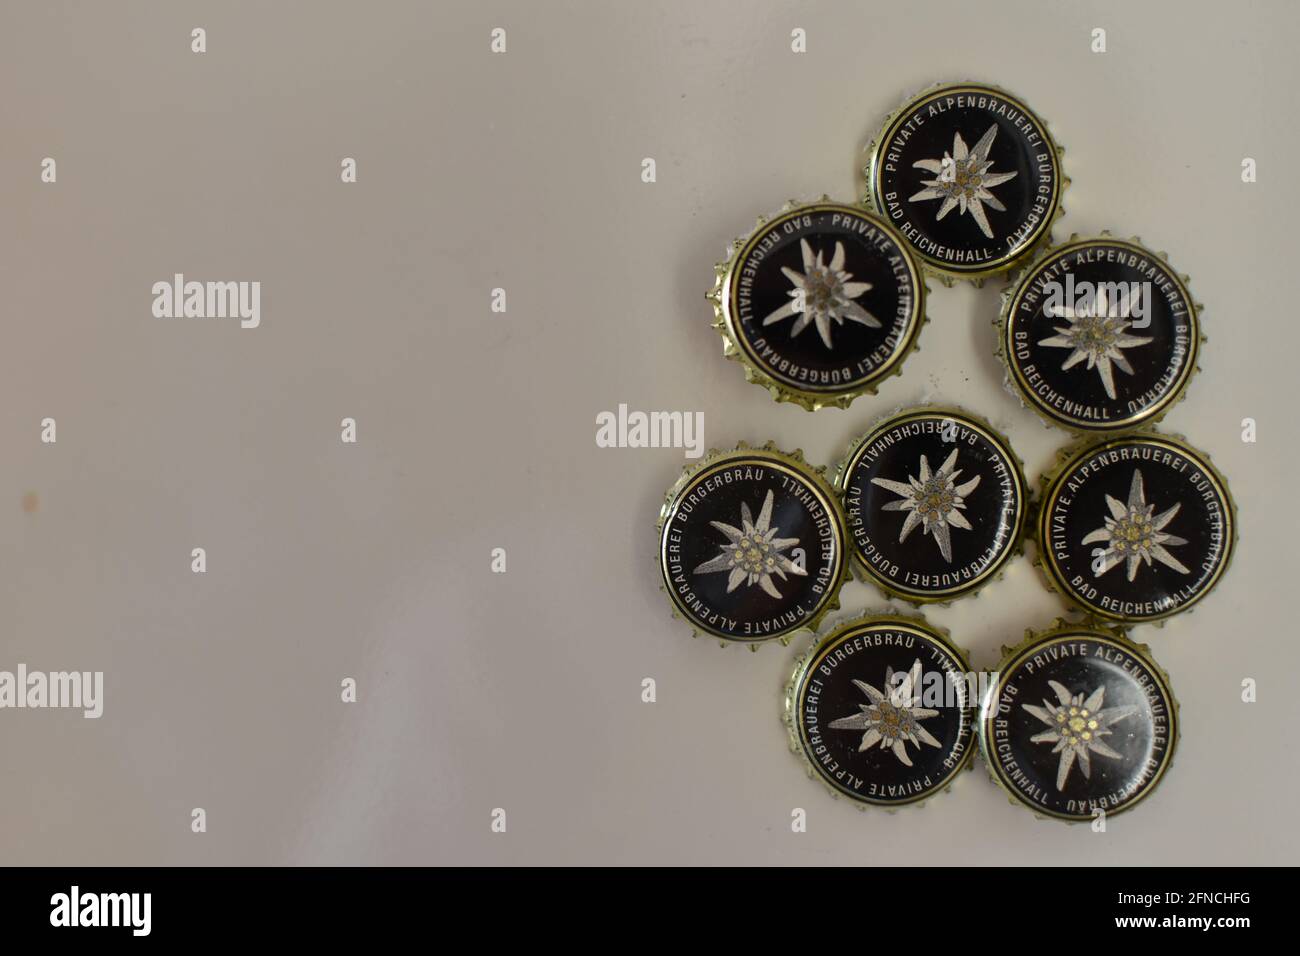 Bad Reichenhall, Germany - May 15, 2021: beer bottle caps of Buergerbraeu Bad Reichenhall brewery with Edelweiss wildflower as decoration Stock Photo